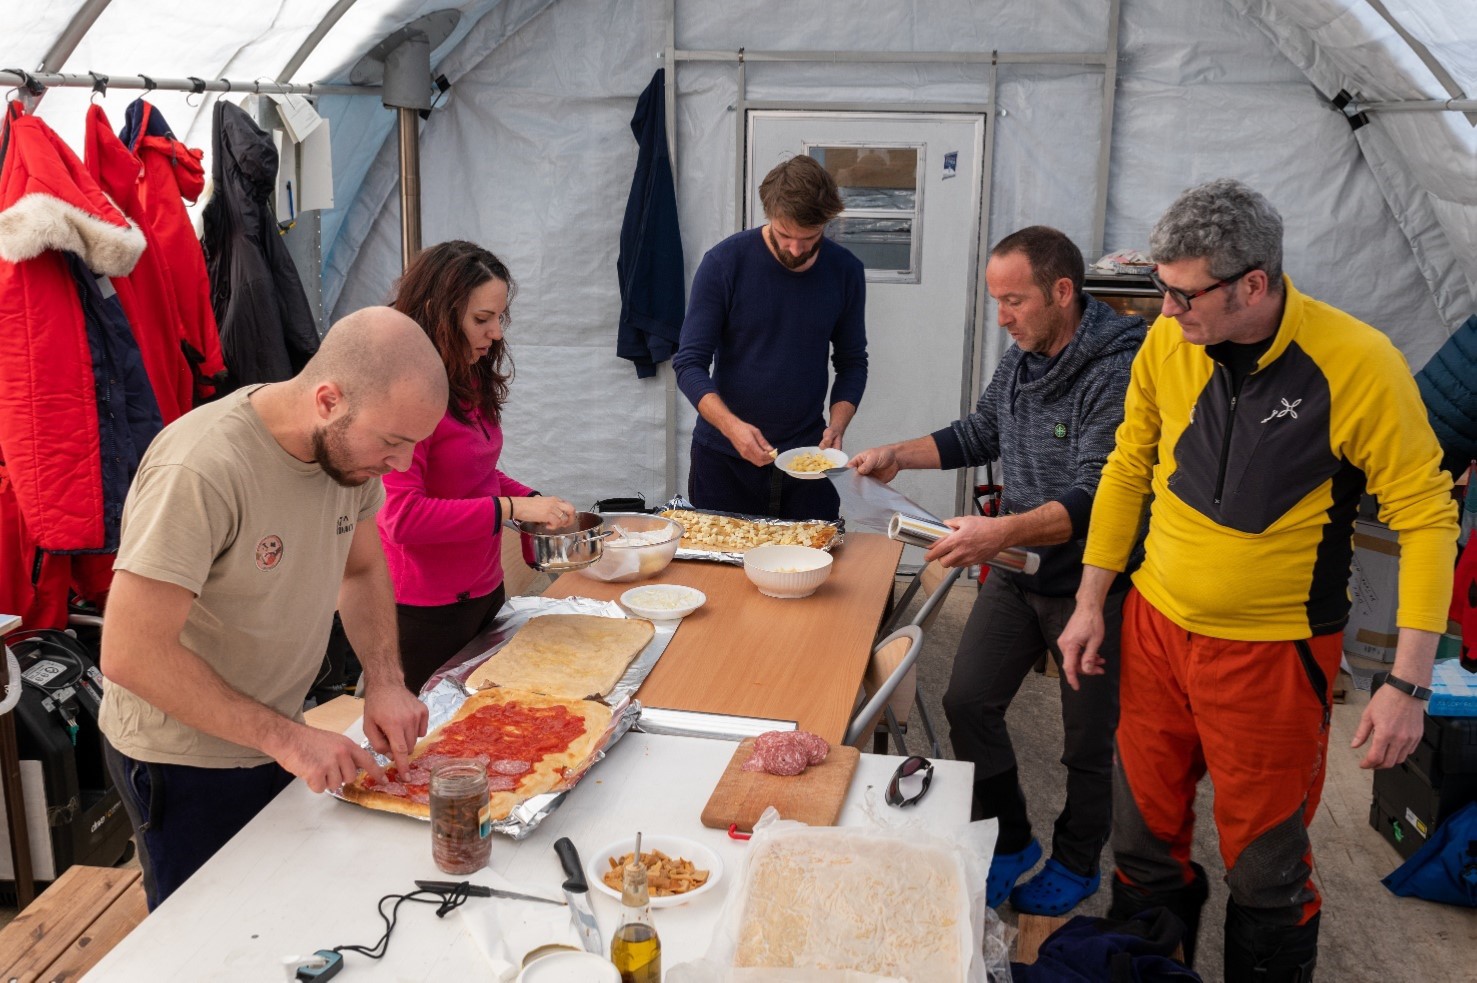 Saverio gets help making the pizzas from (left to right) Andreas, Giuditta, Julien, Michele and Saverio